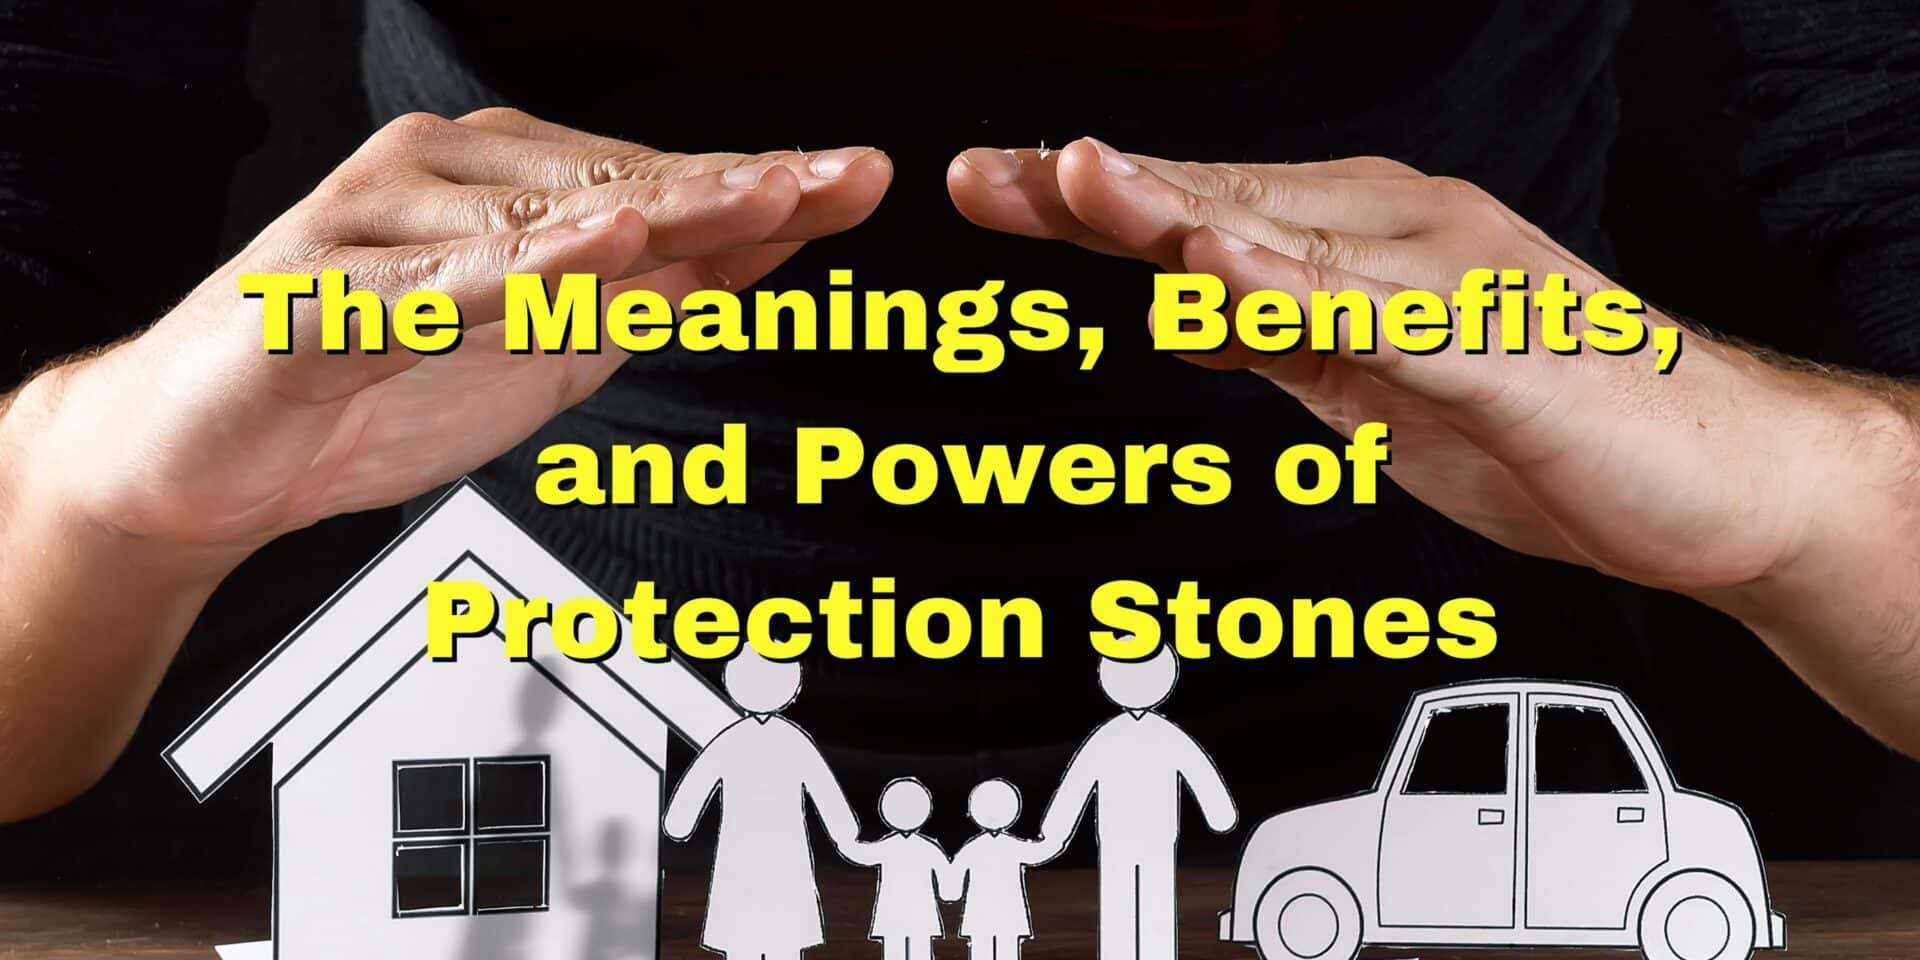 The Meanings, Benefits, and Powers of Protection Stones